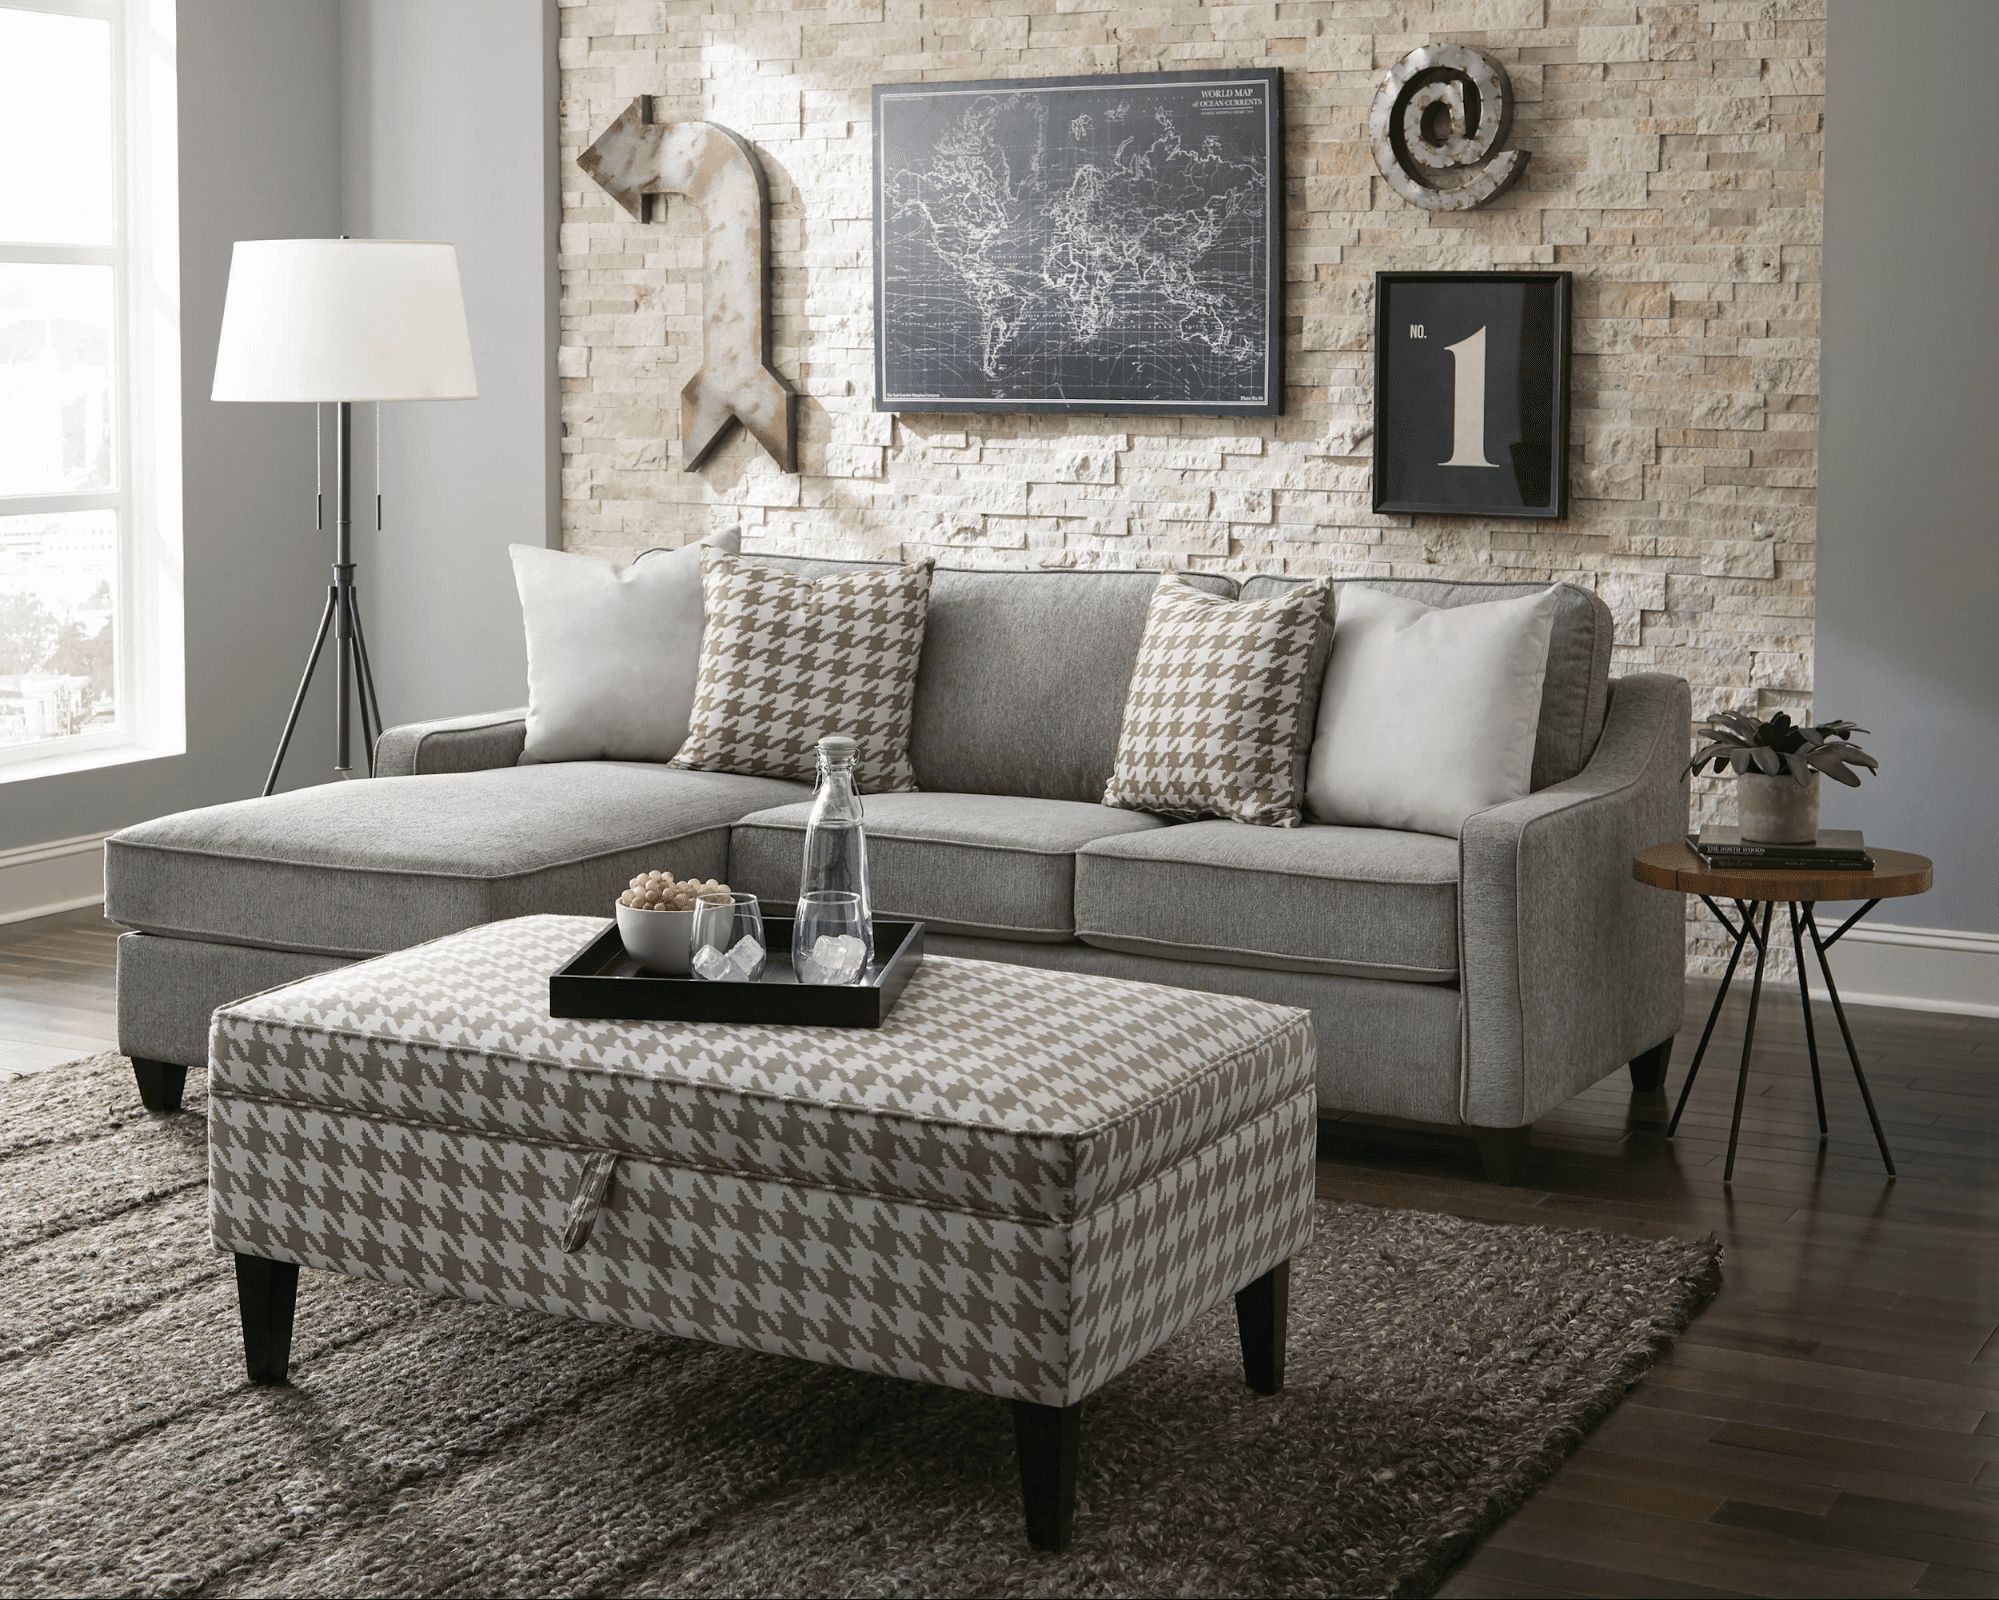 How To Pick A Small Sectional Sofa For A Small Space – Coast Inside Sectional Sofas With Ottomans And Tufted Back Cushion (View 18 of 20)